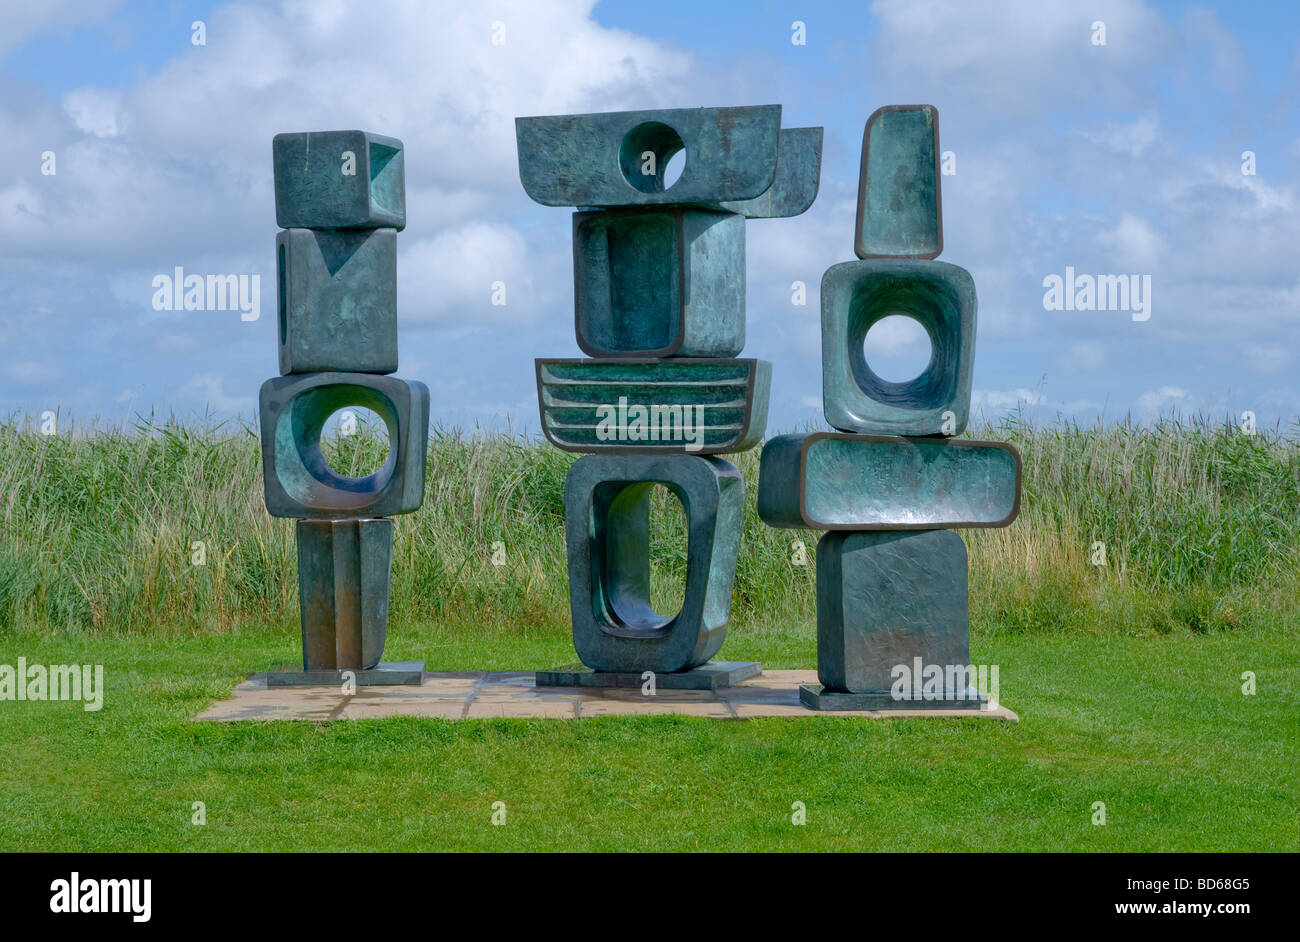 Family of Man - sculptures by Barbara Hepworth - at Snape Maltings, Suffolk, England. Stock Photo